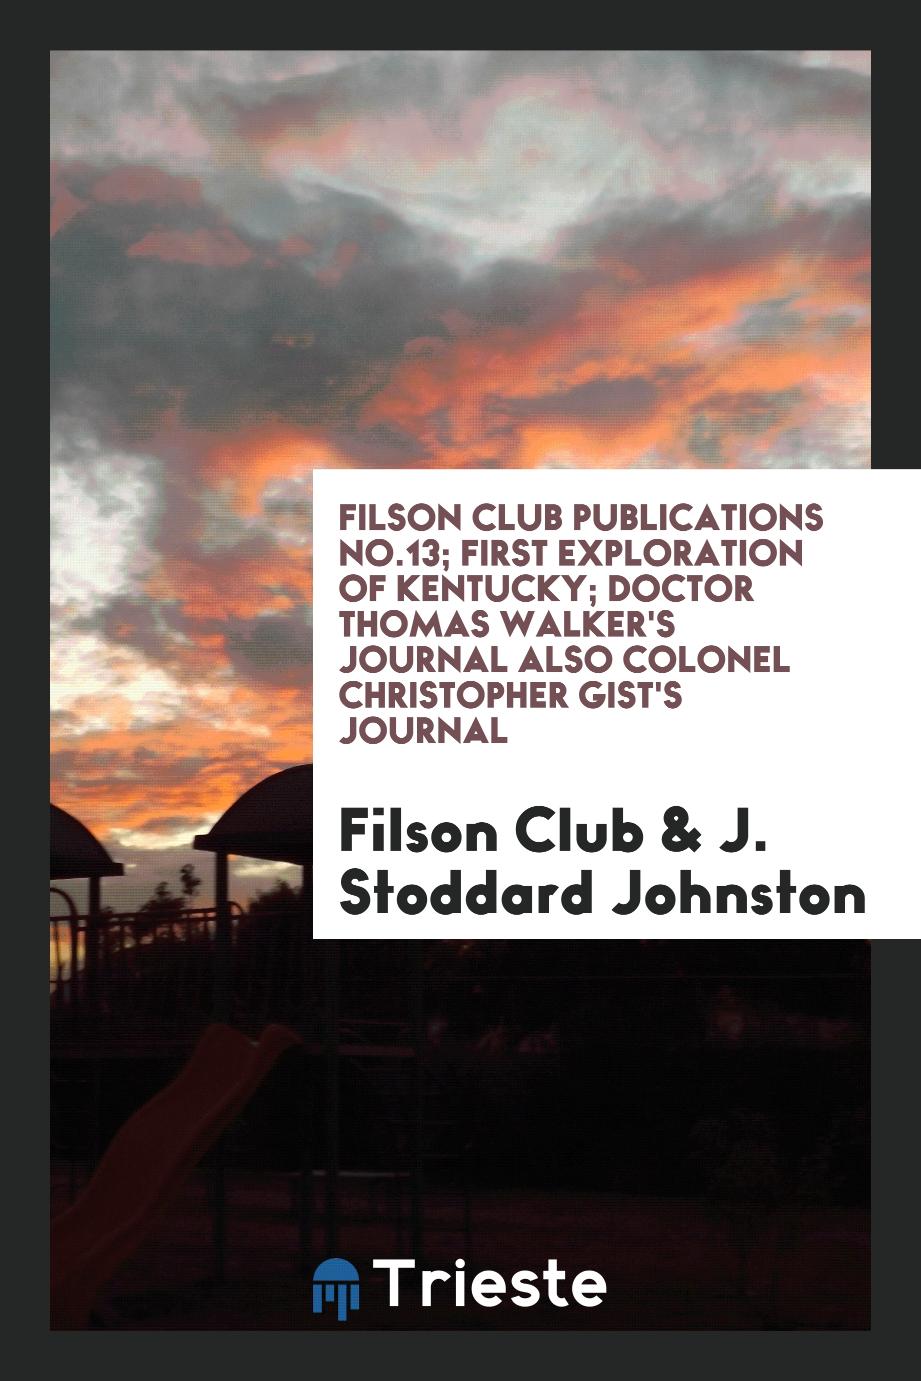 Filson Club Publications No.13; First Exploration of Kentucky; Doctor Thomas Walker's Journal also Colonel Christopher Gist's Journal